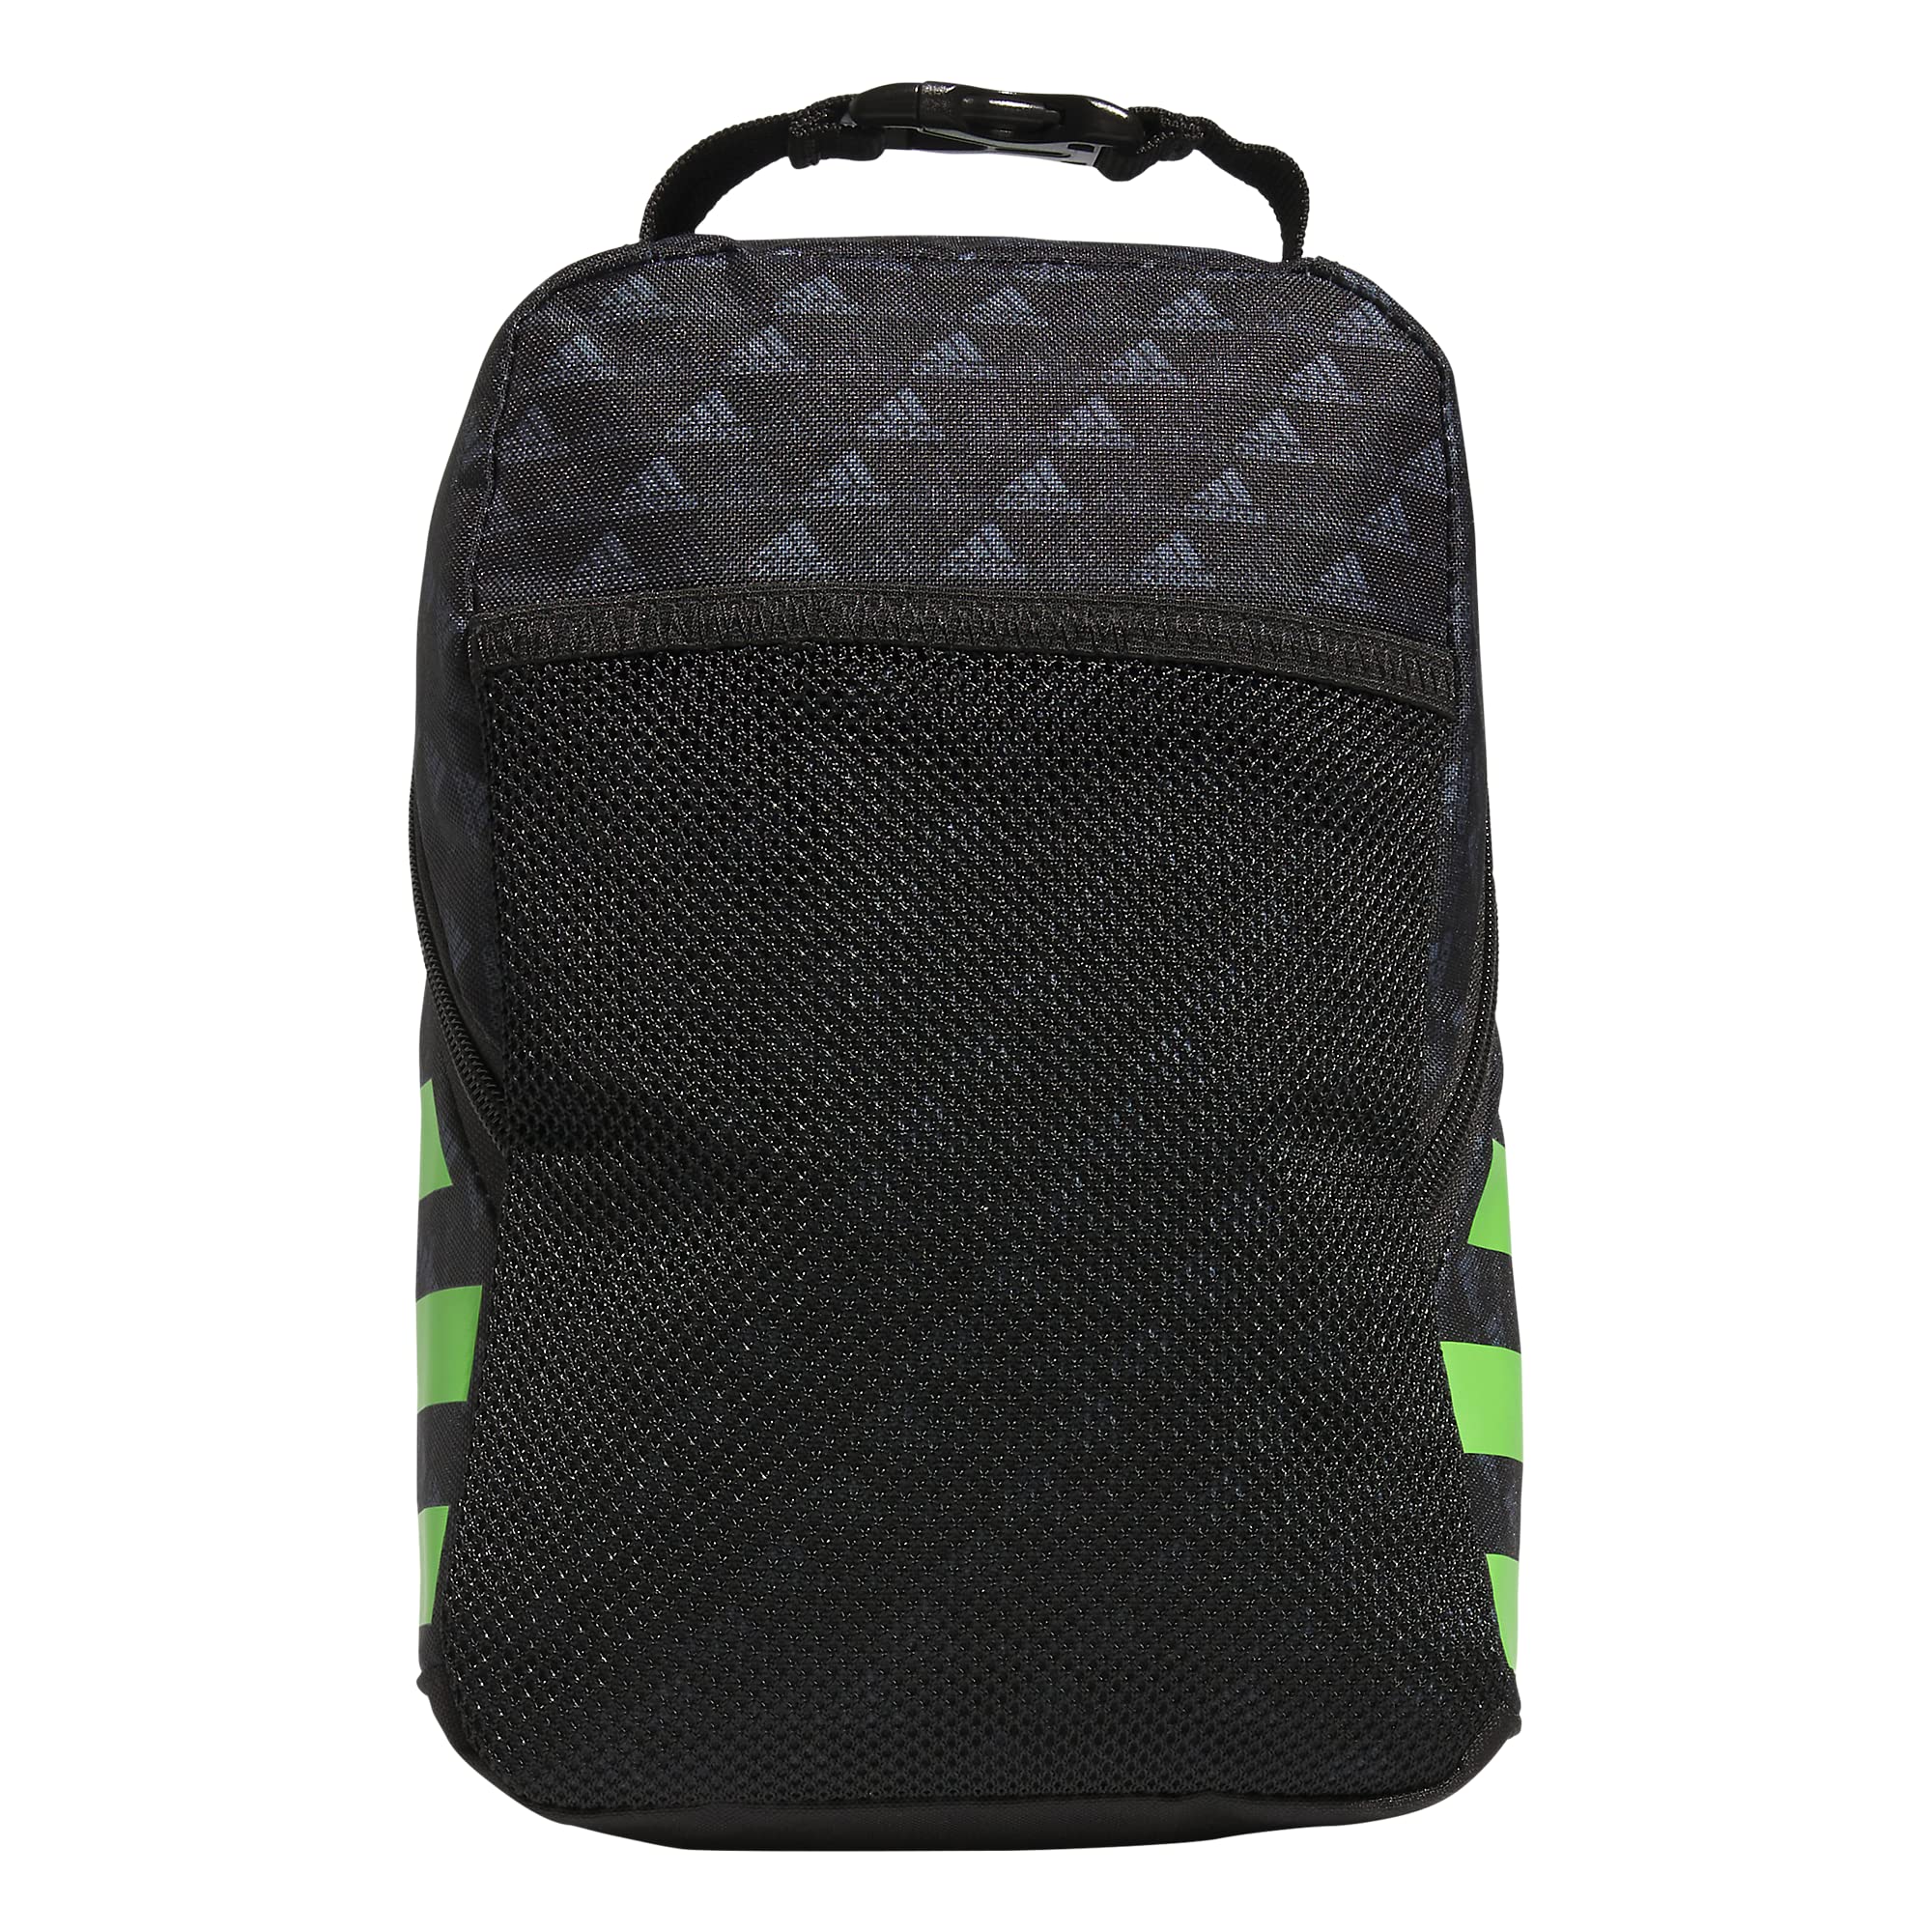 adidas Santiago 2 Insulated Lunch Bag, BOS Mini Monogram Black/Lucid Lime Green, One Size